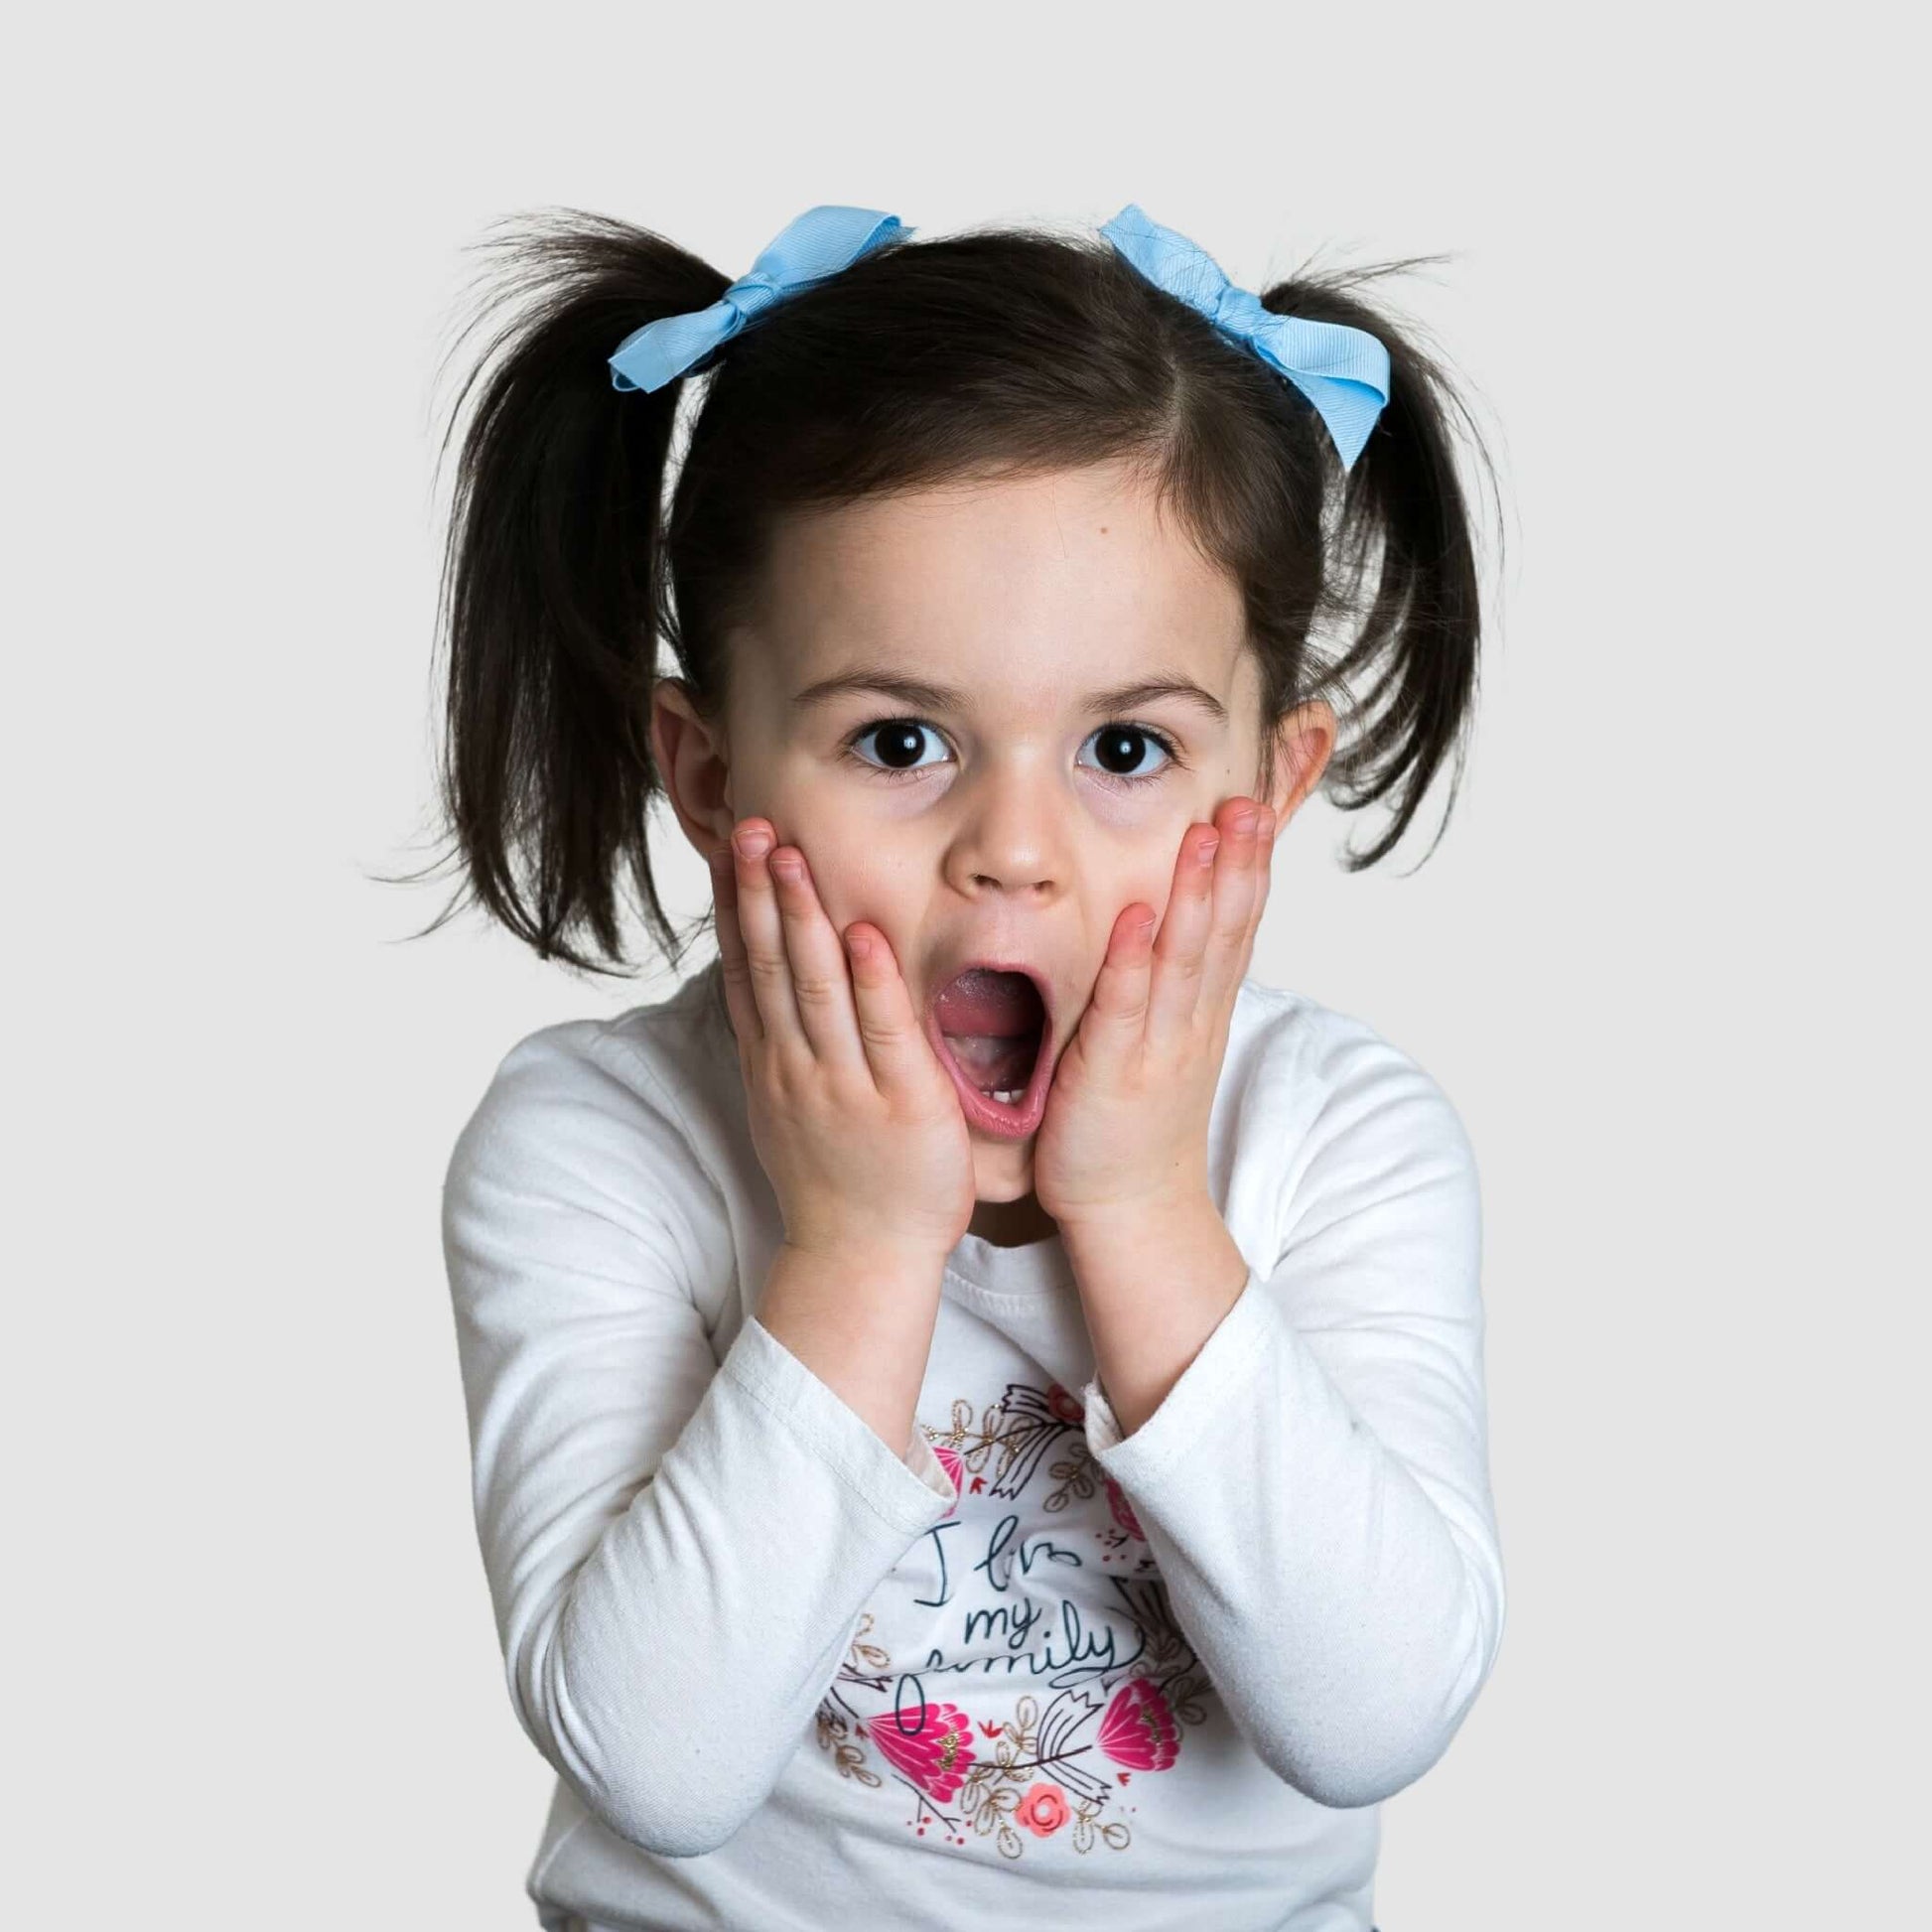 Toddler with pigtails wearing blue grosgrain baby Kayla bow clips, expressing surprise with hands on cheeks.